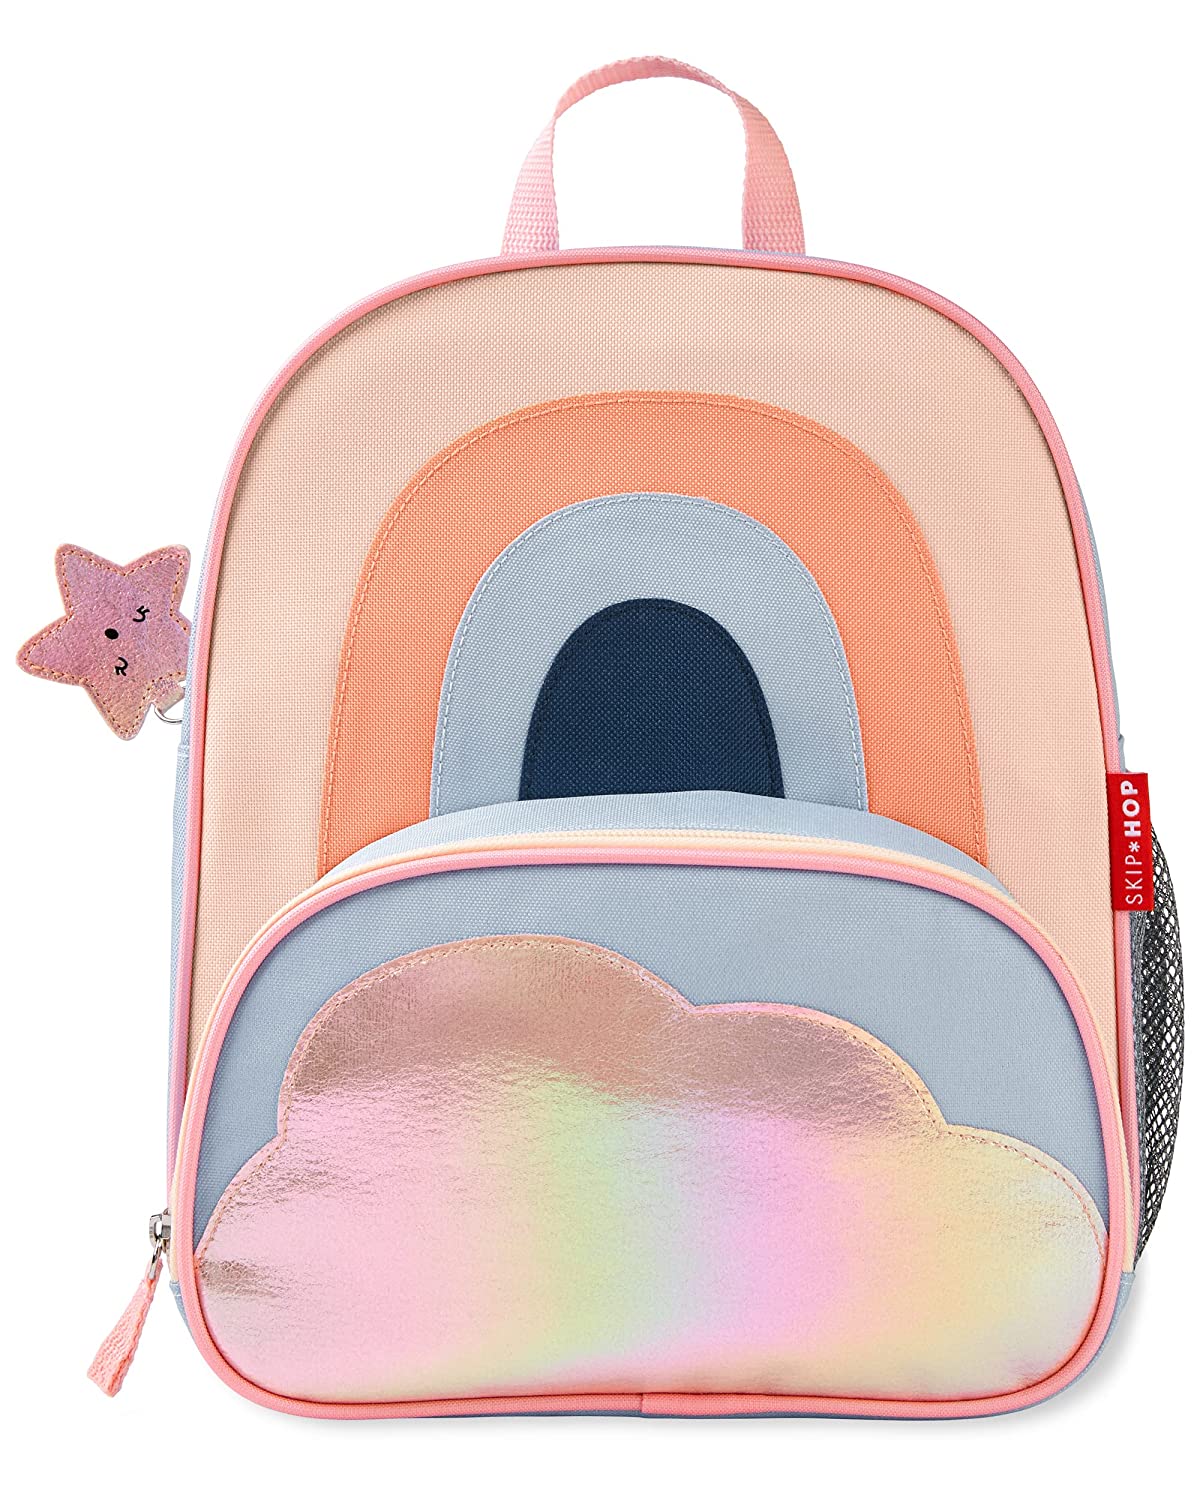 Skip Hop Back To School Spark Style Big Kid Backpack, Rainbow for Kids Ages 3-7 Years